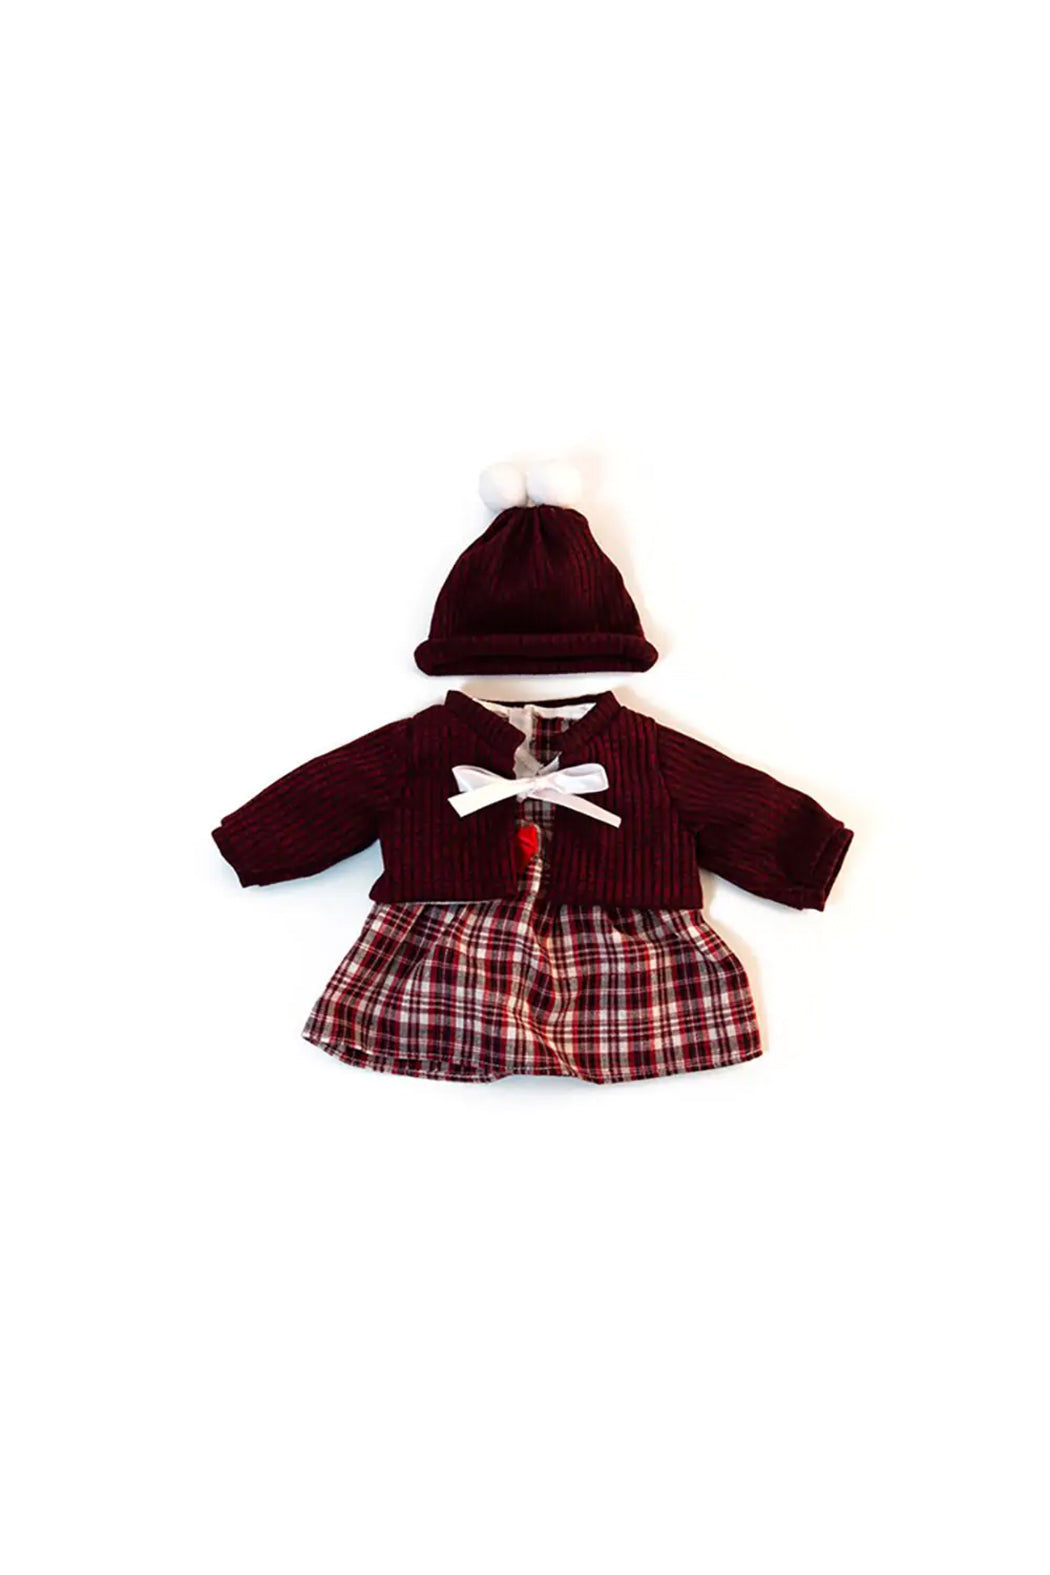 Miniland 15" Doll Clothes - Cold Weather Dress